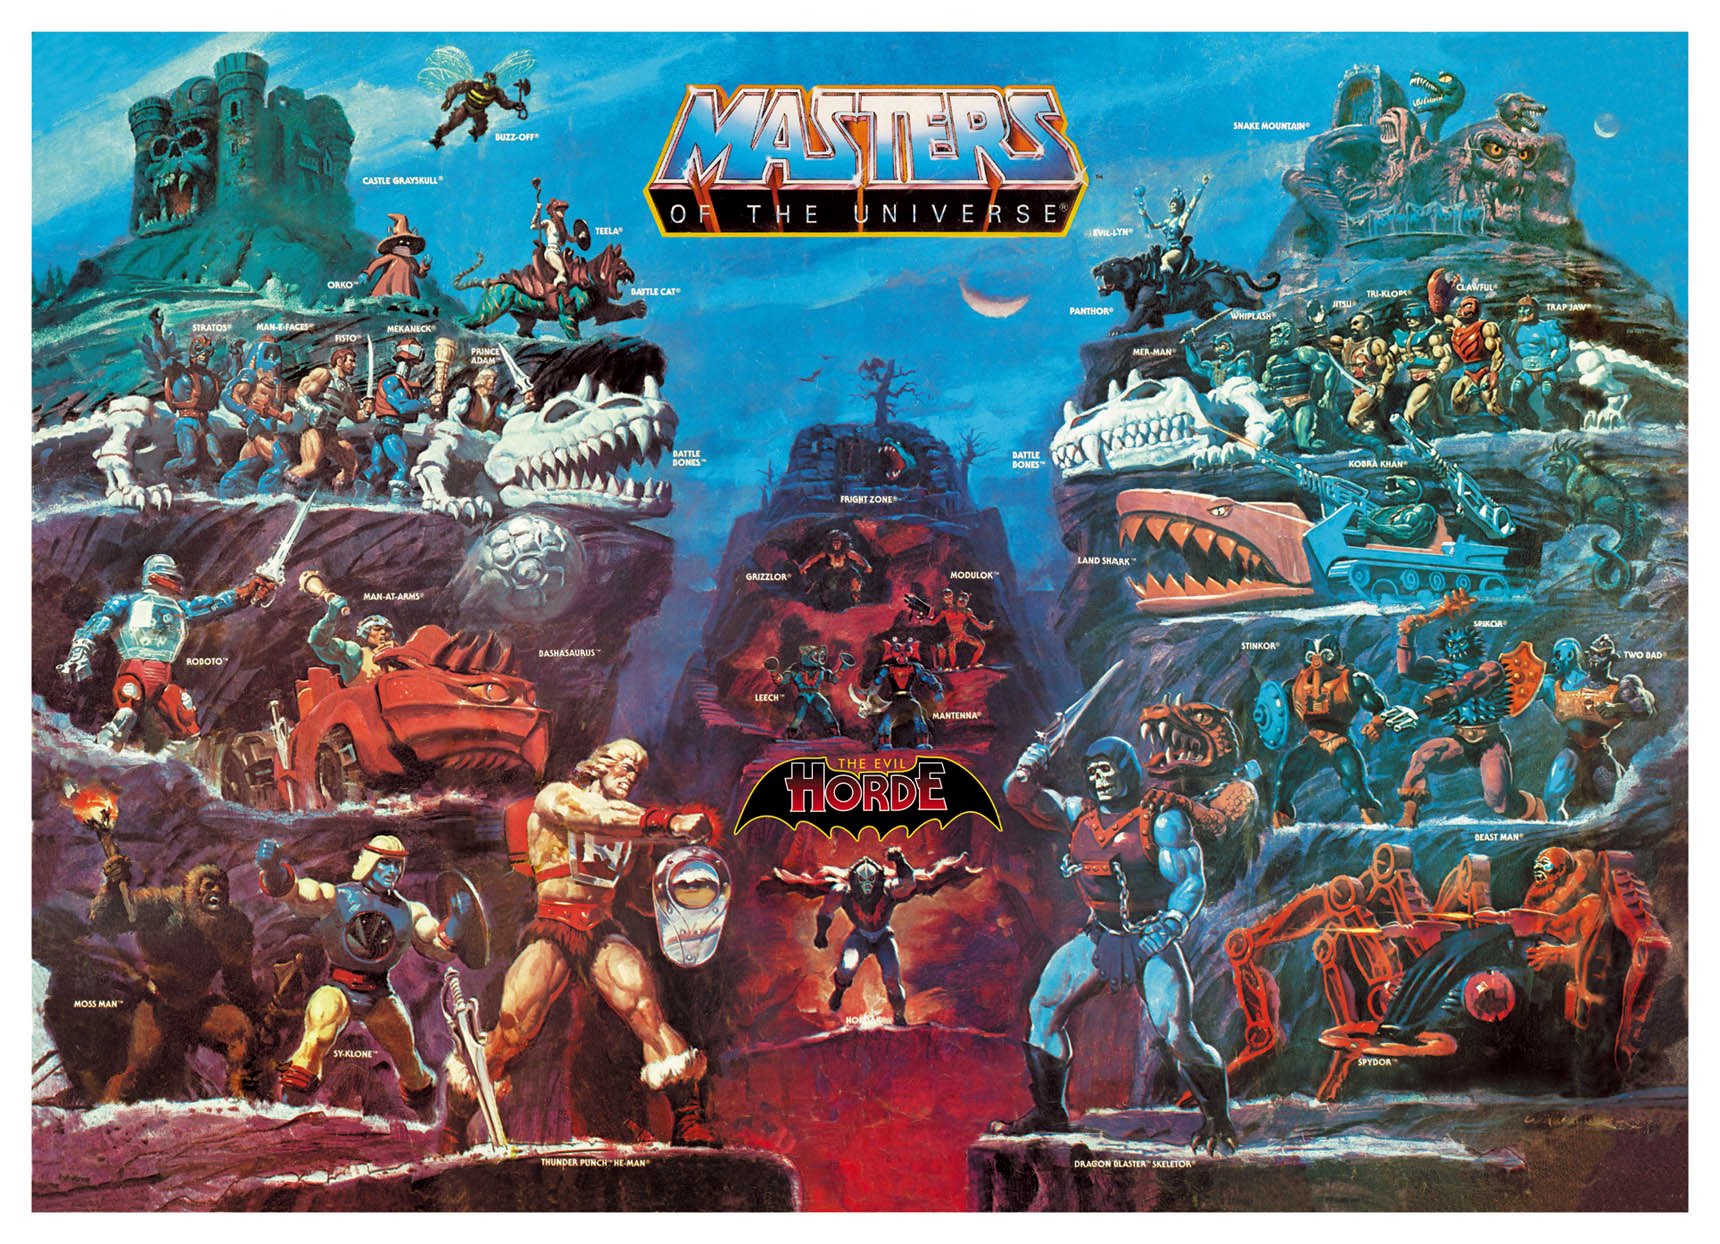 He Man And The Masters Of The Universe Wallpaper